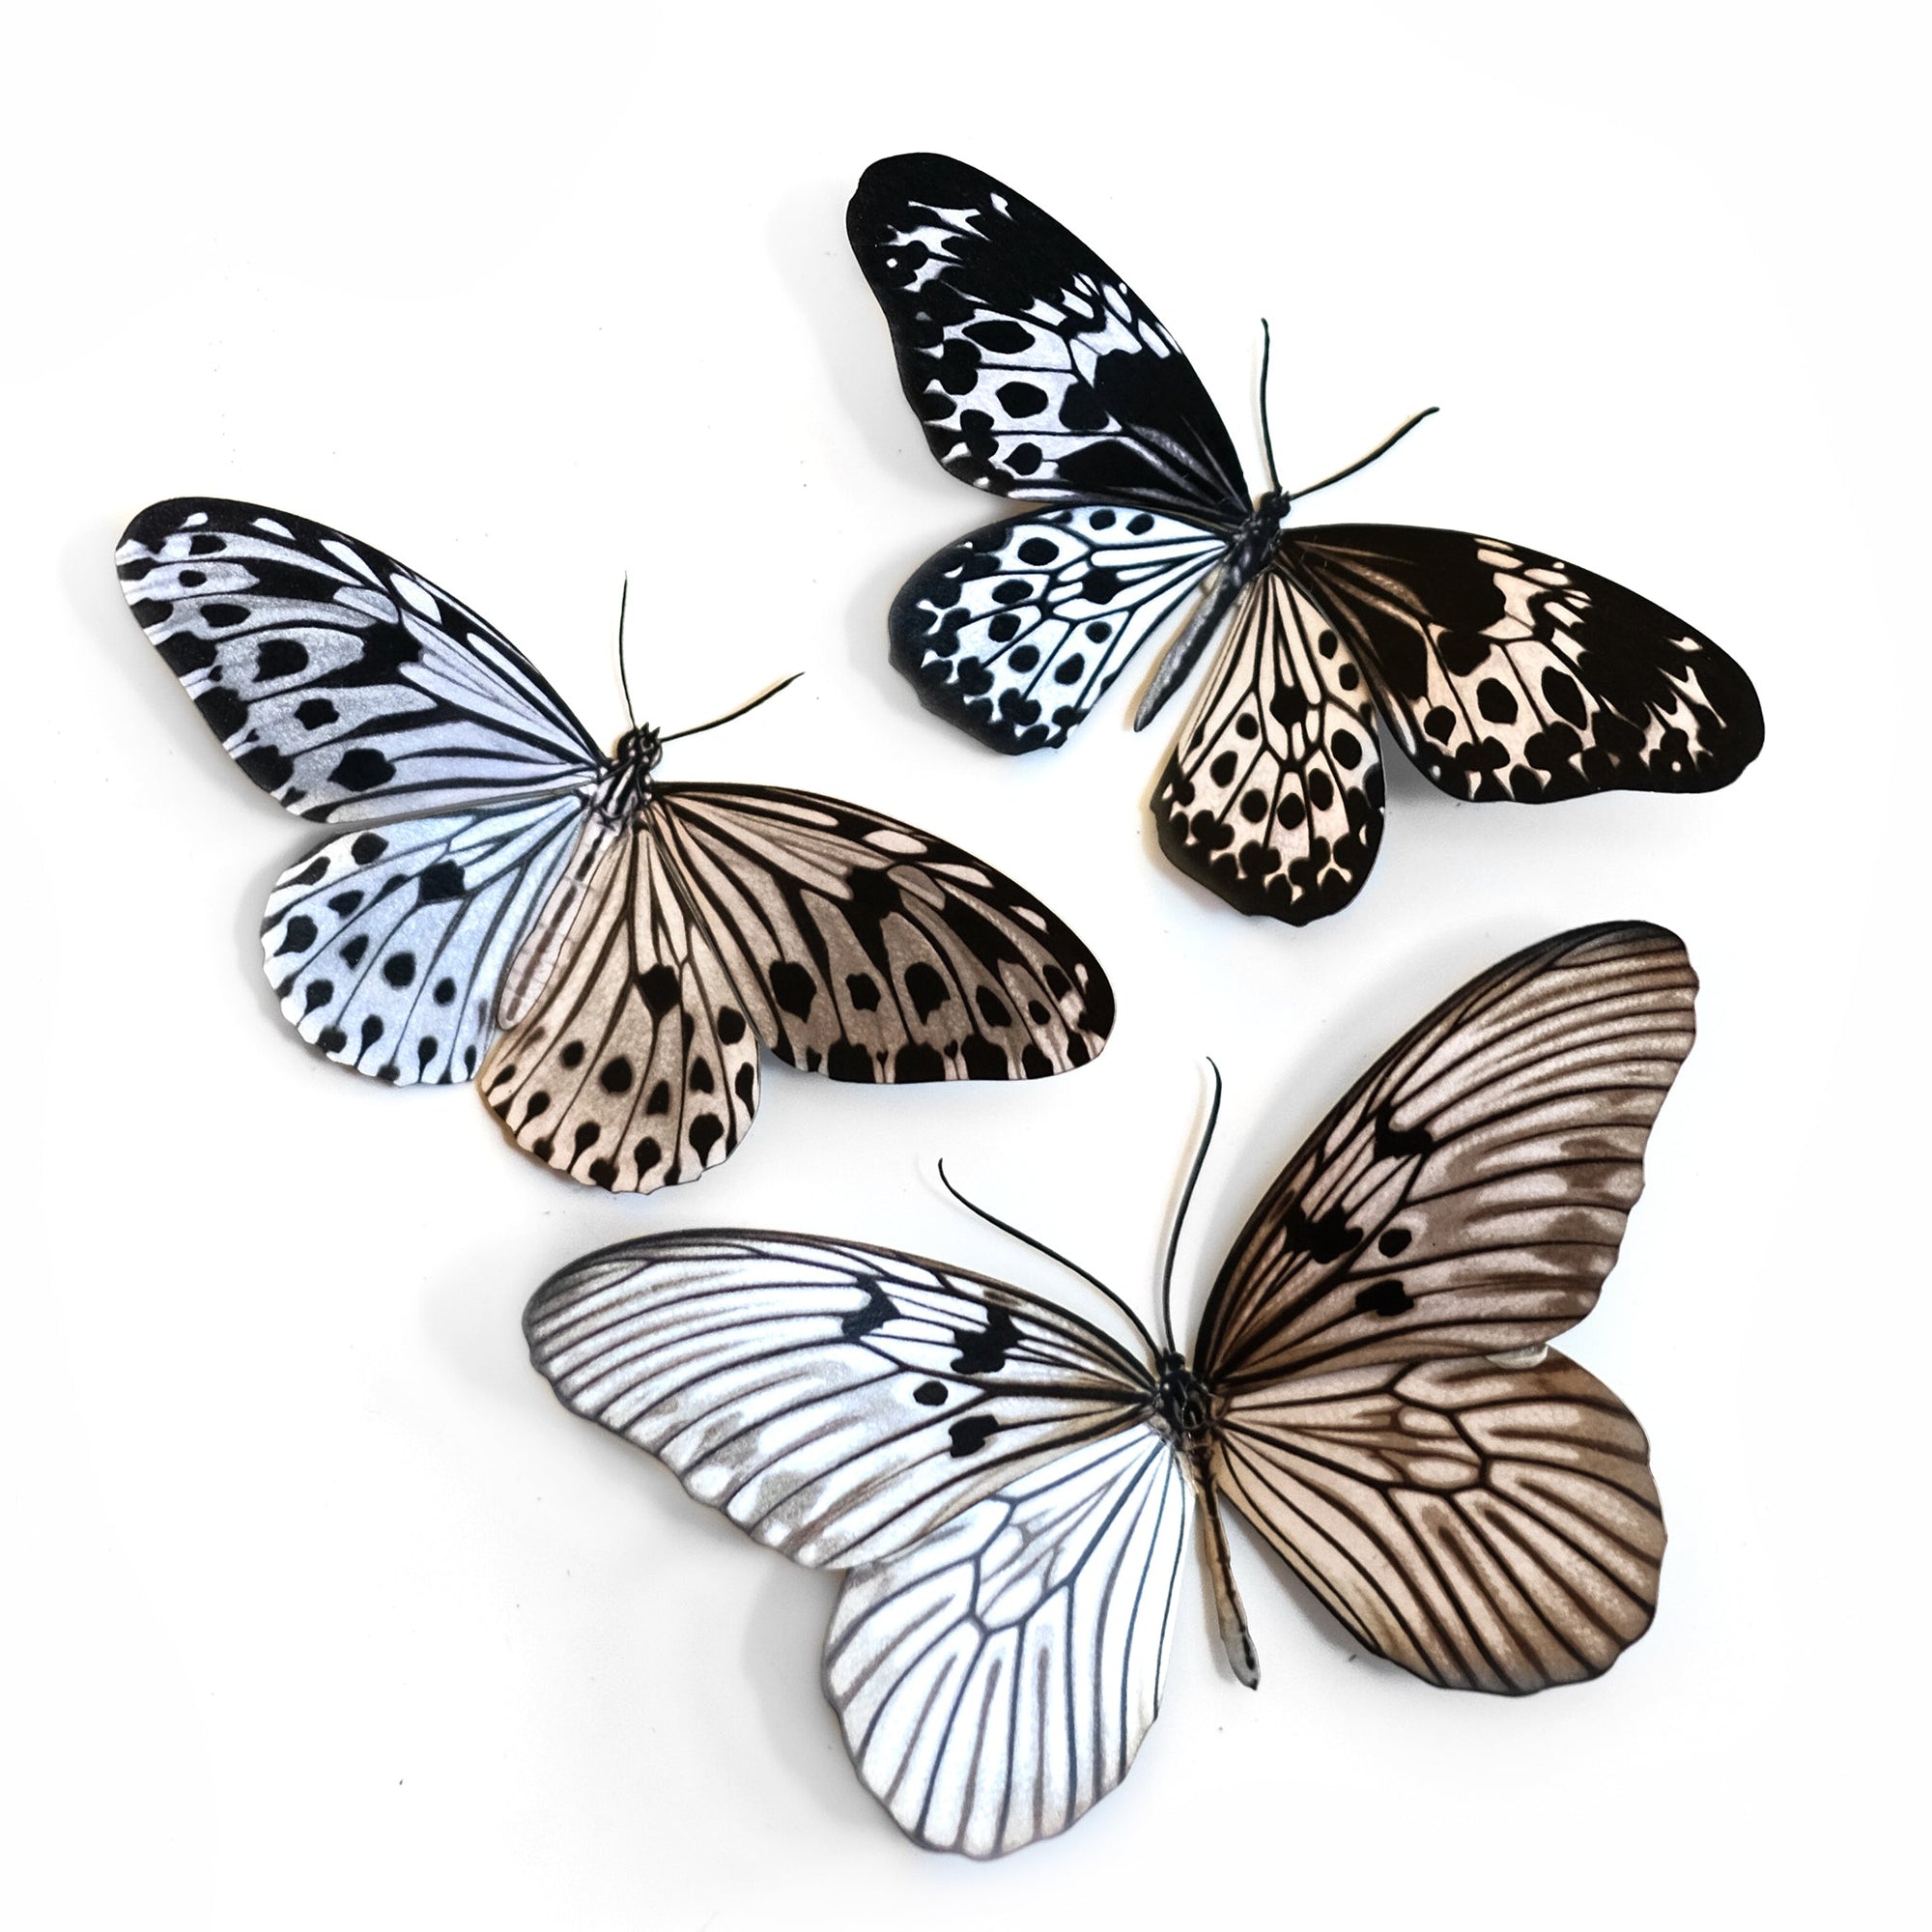 'Marble' Butterfly Set - Artist Discount